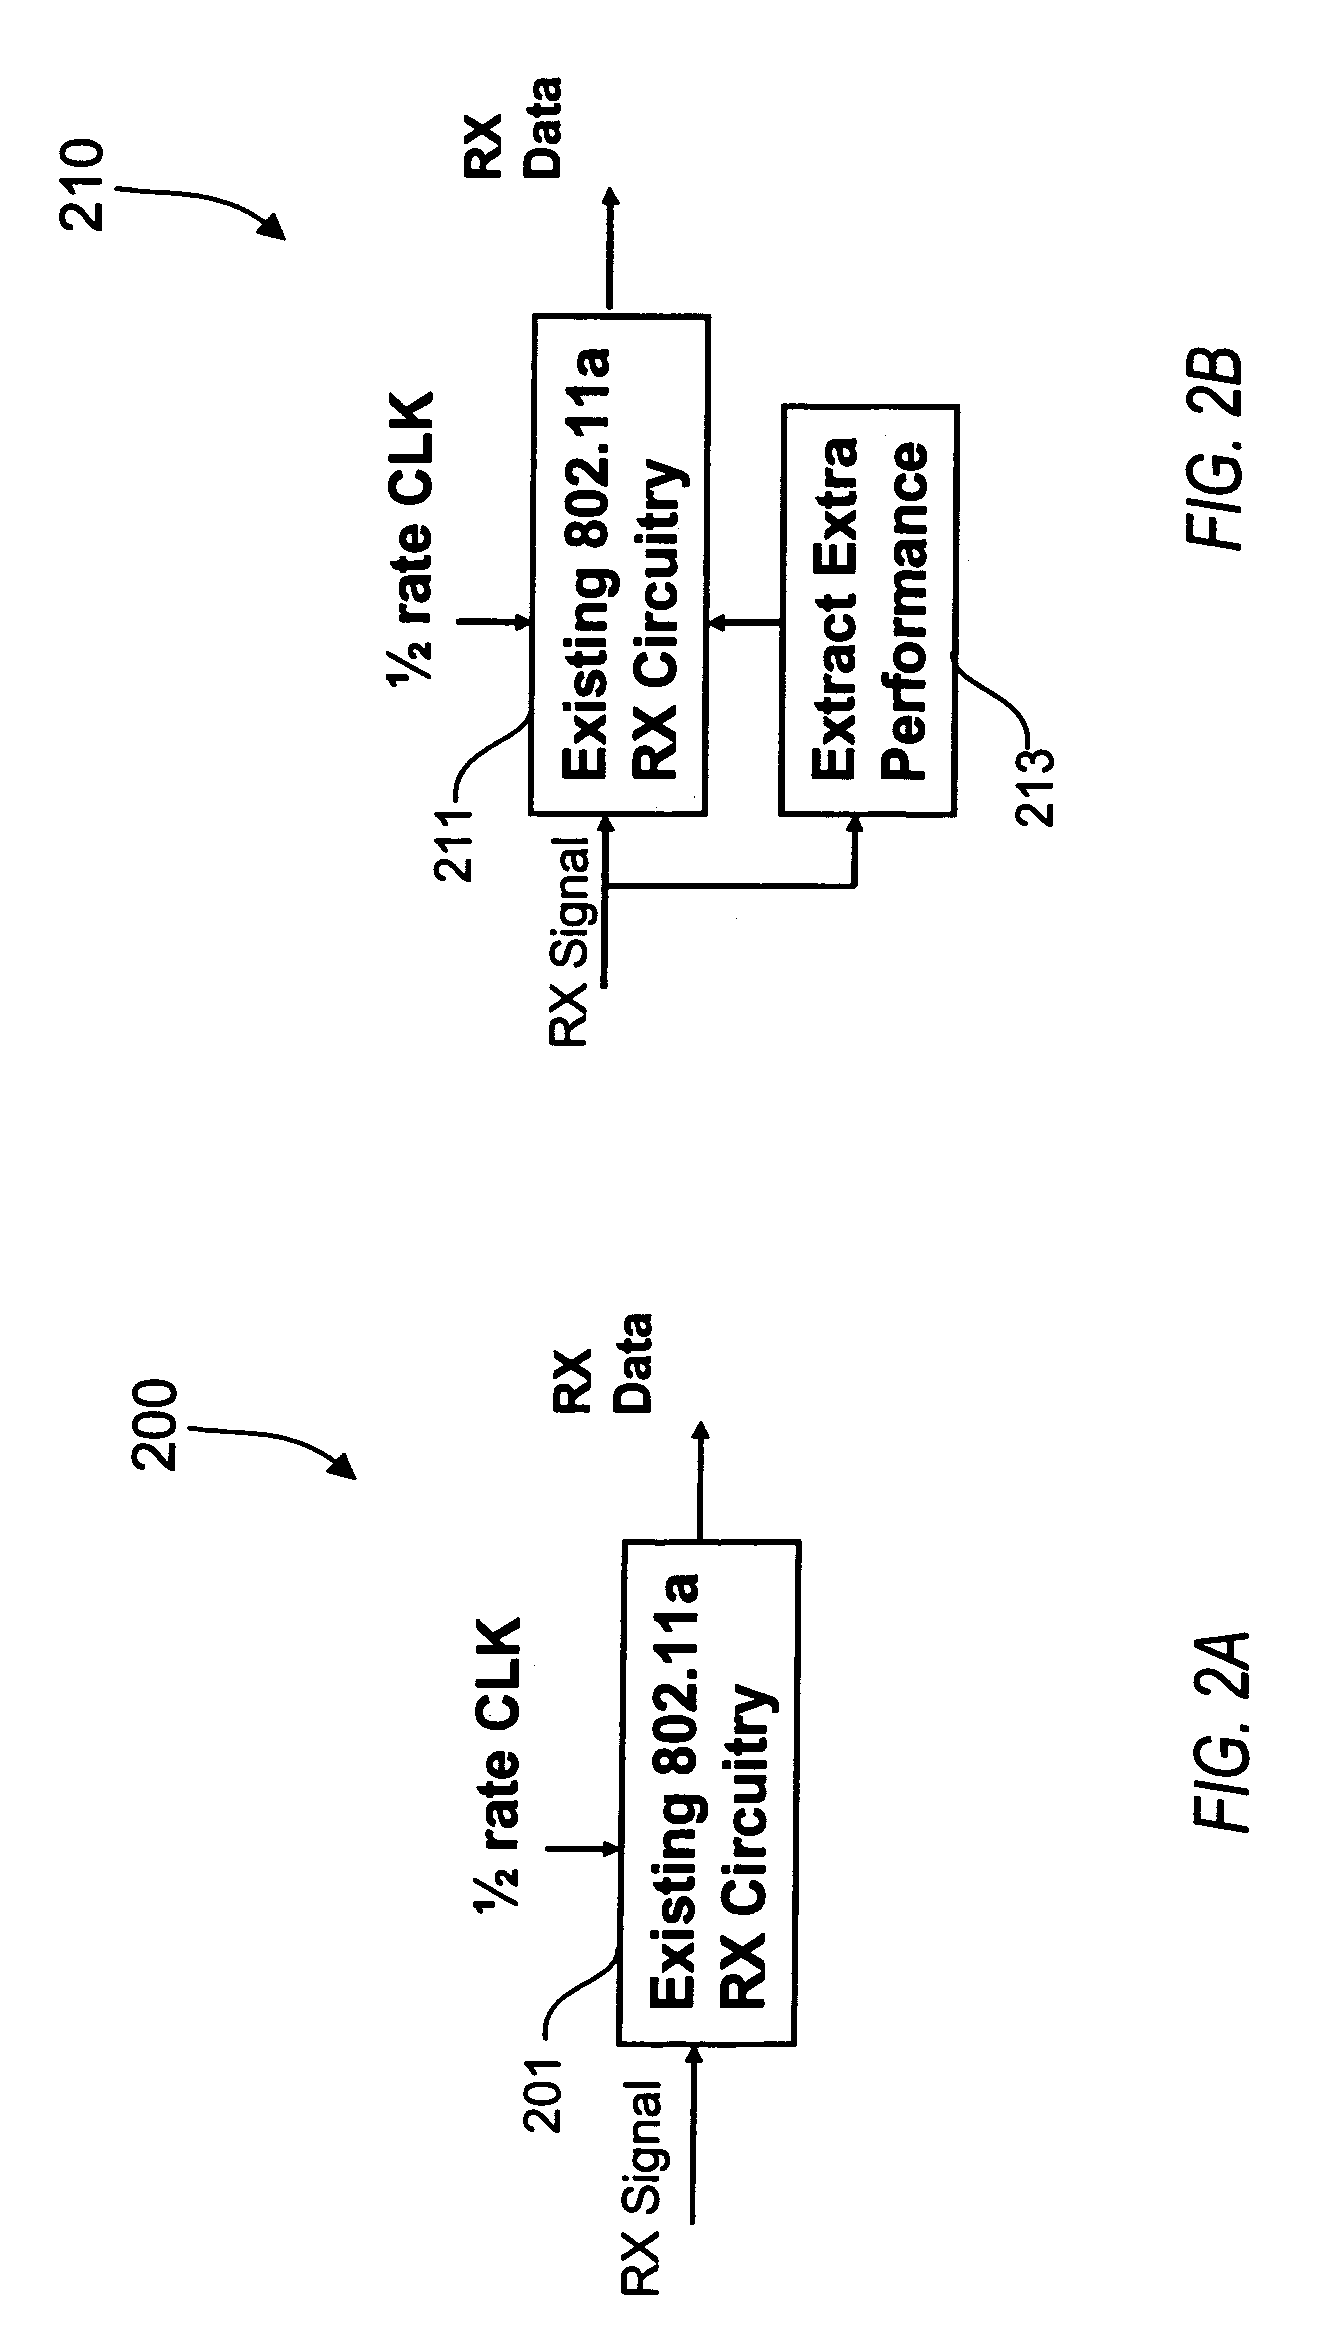 Modified OFDM subcarrier profile